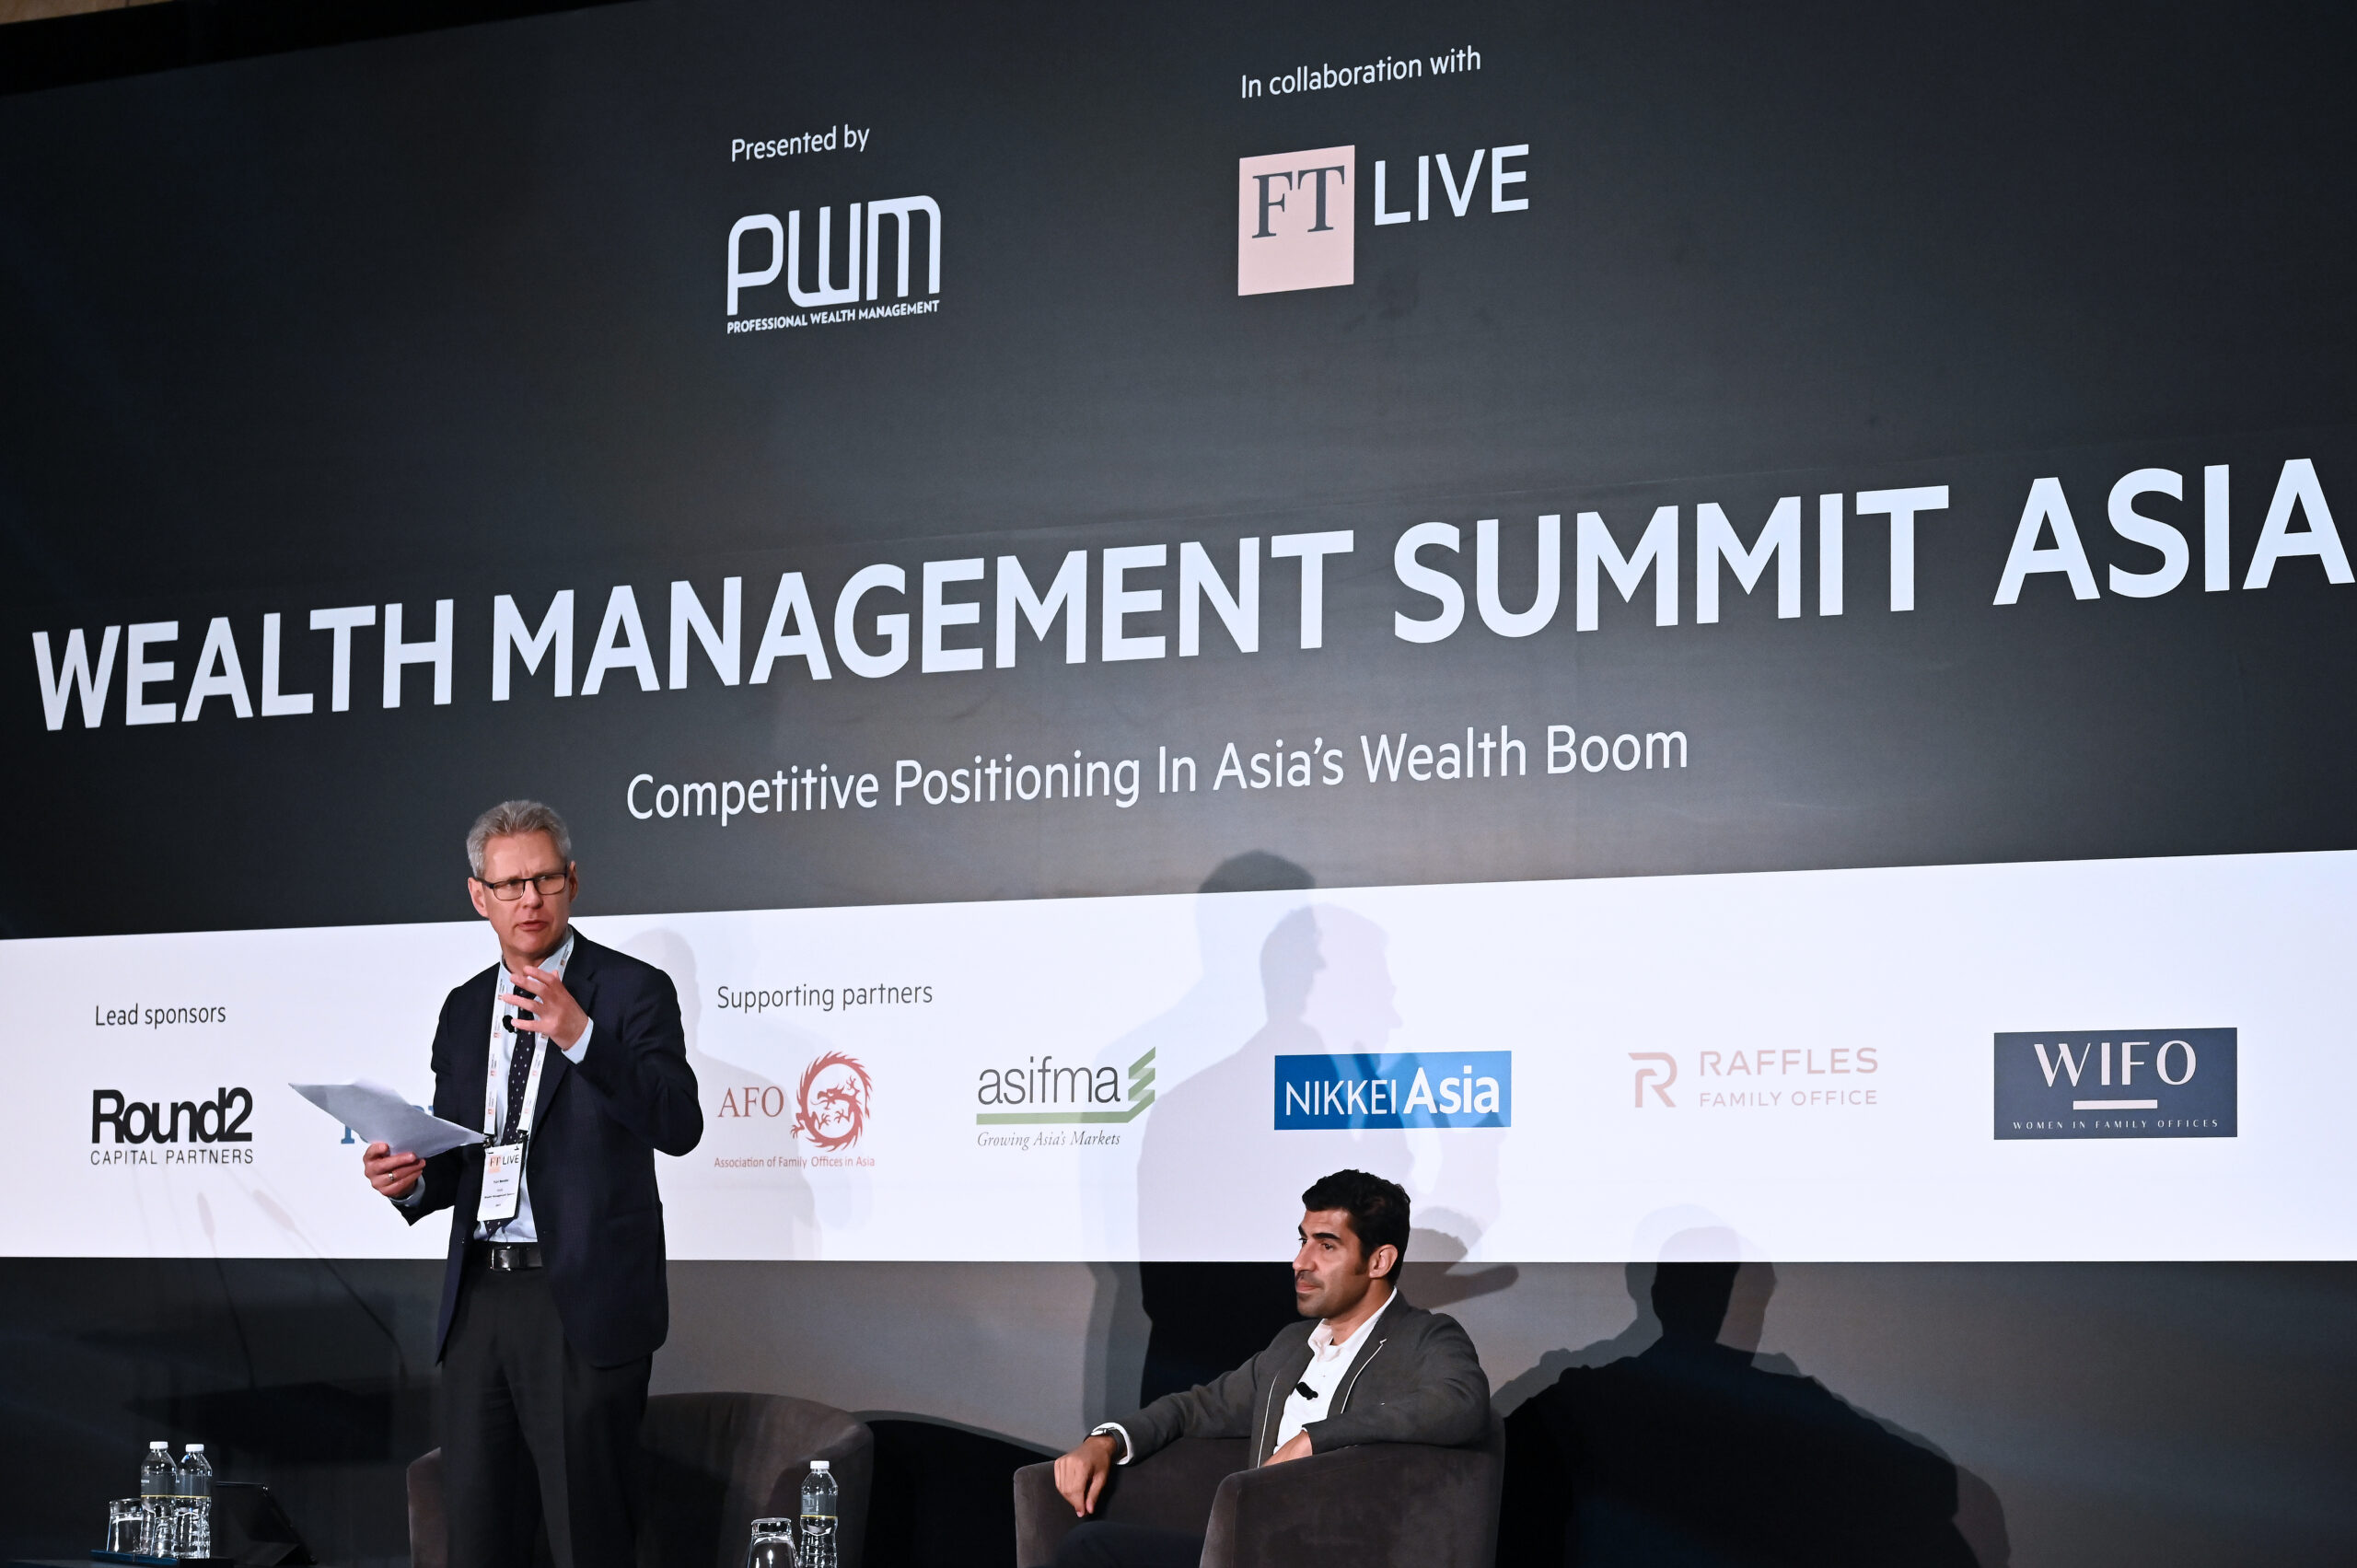 Keynote discussion at the FT Wealth Management Summit Asia